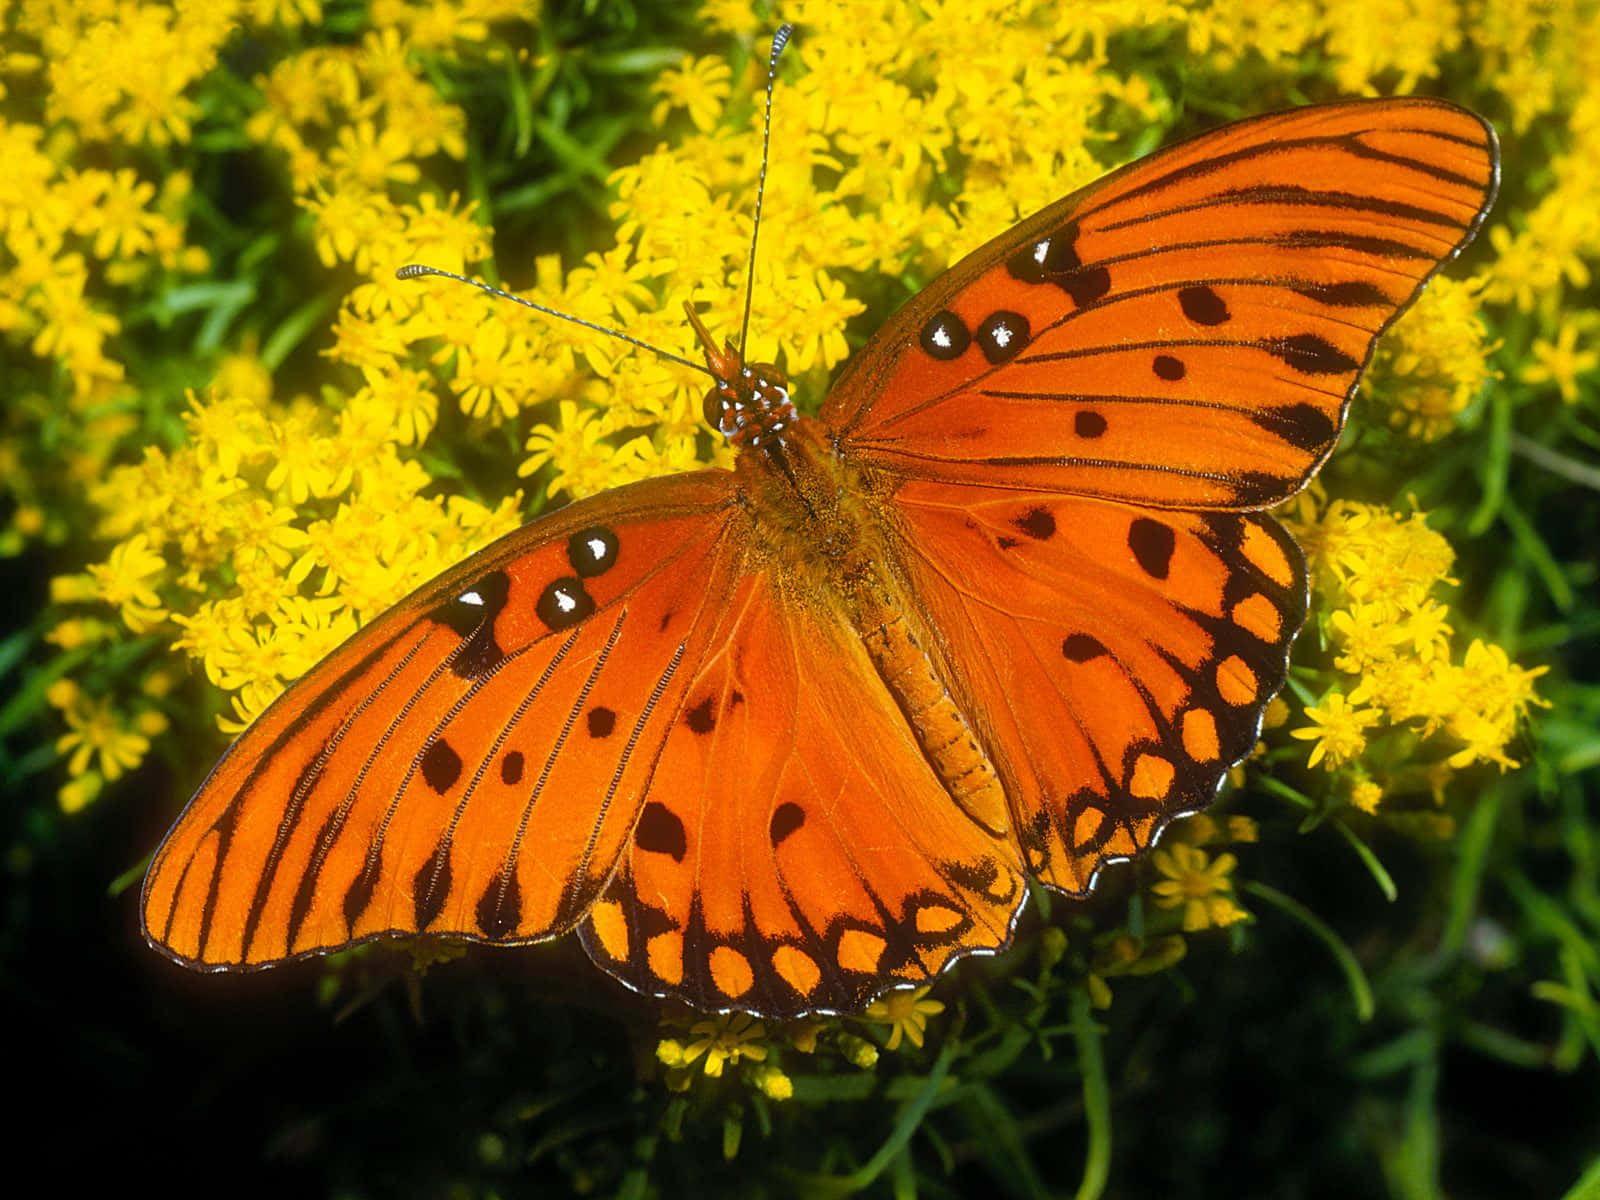 The beauty of nature showcased by this graceful butterfly